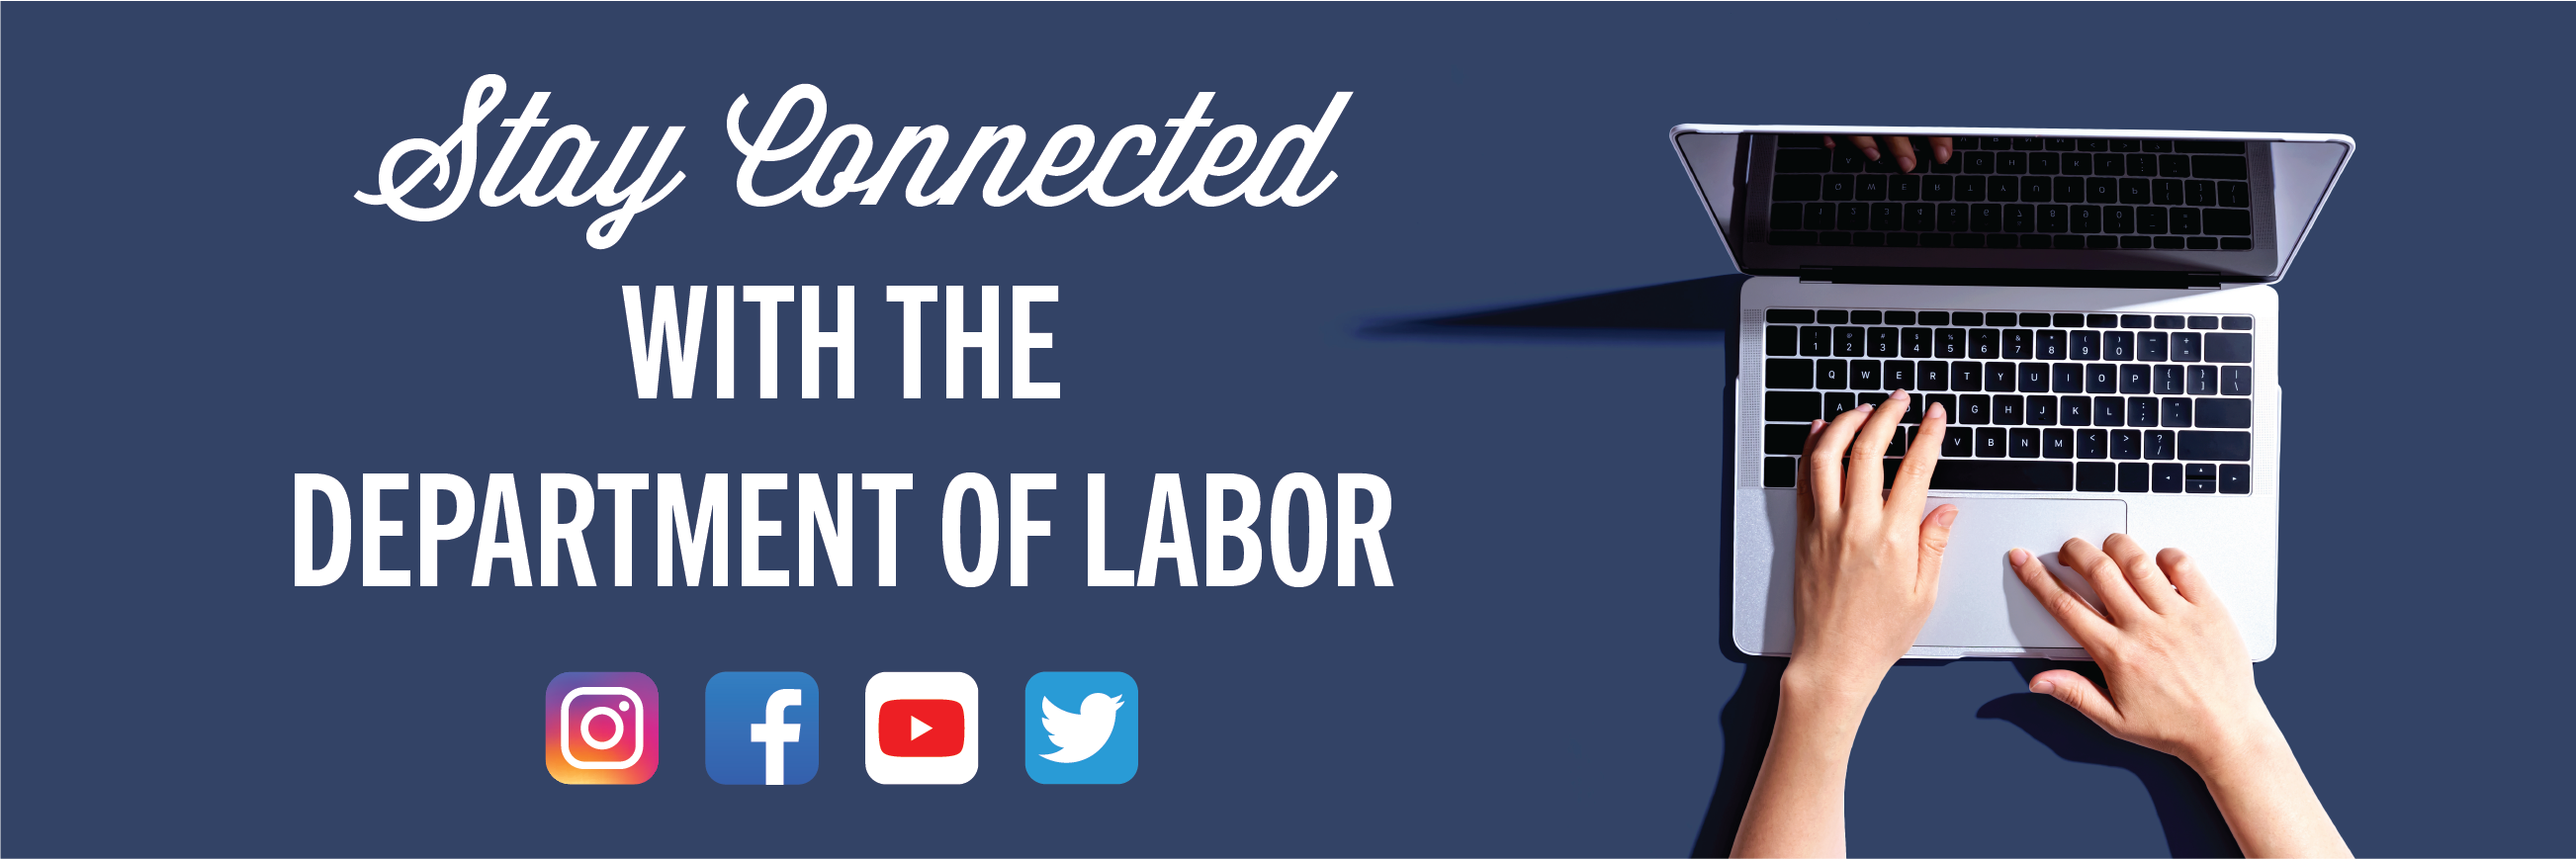 Stay Connected with the Department of Labor